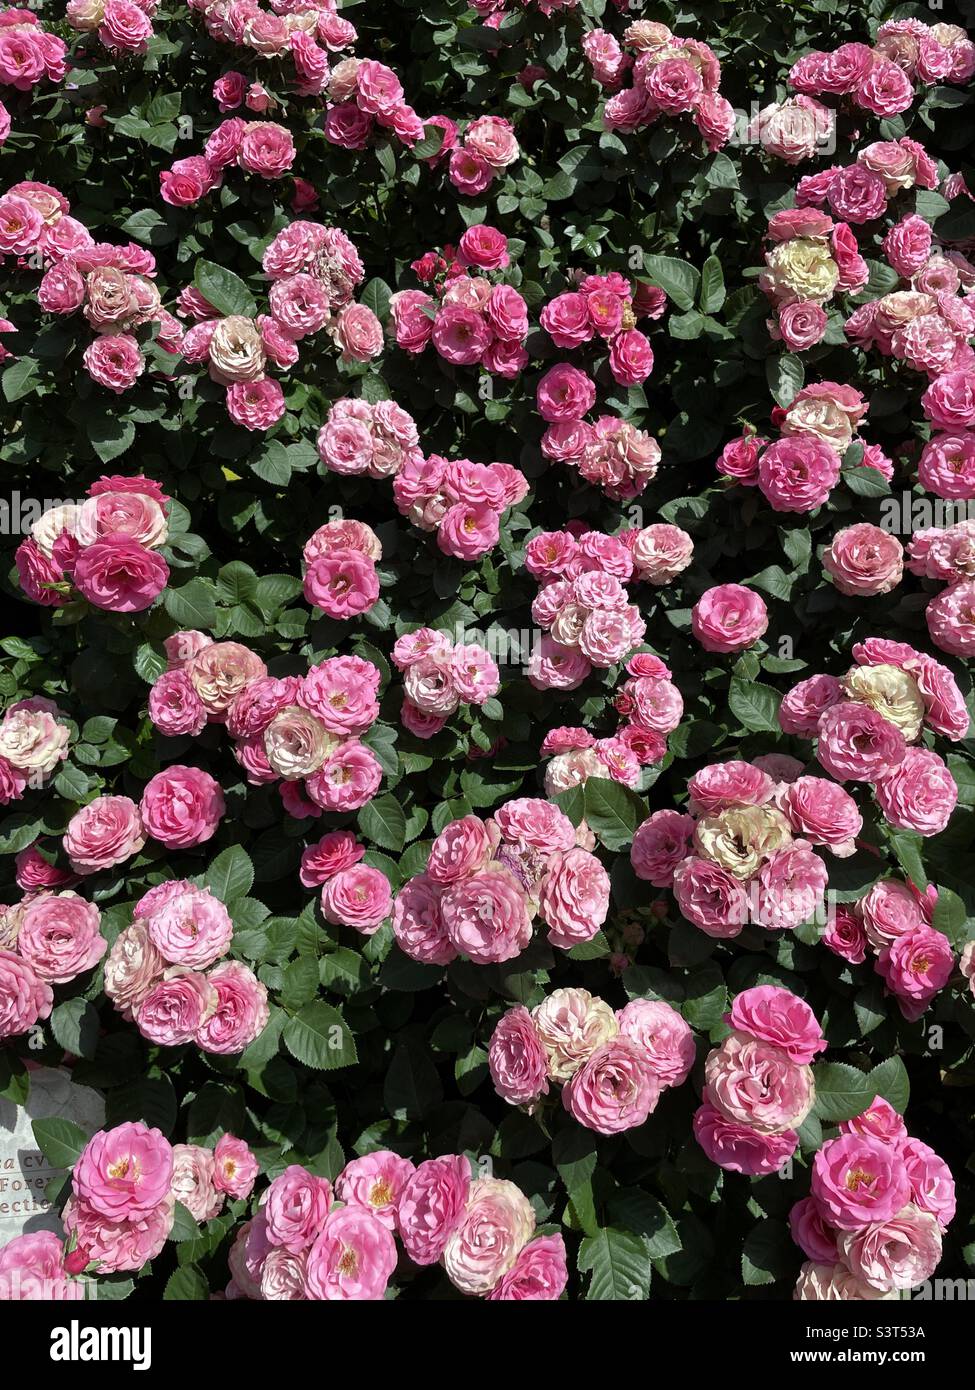 Wall of roses Stock Photo